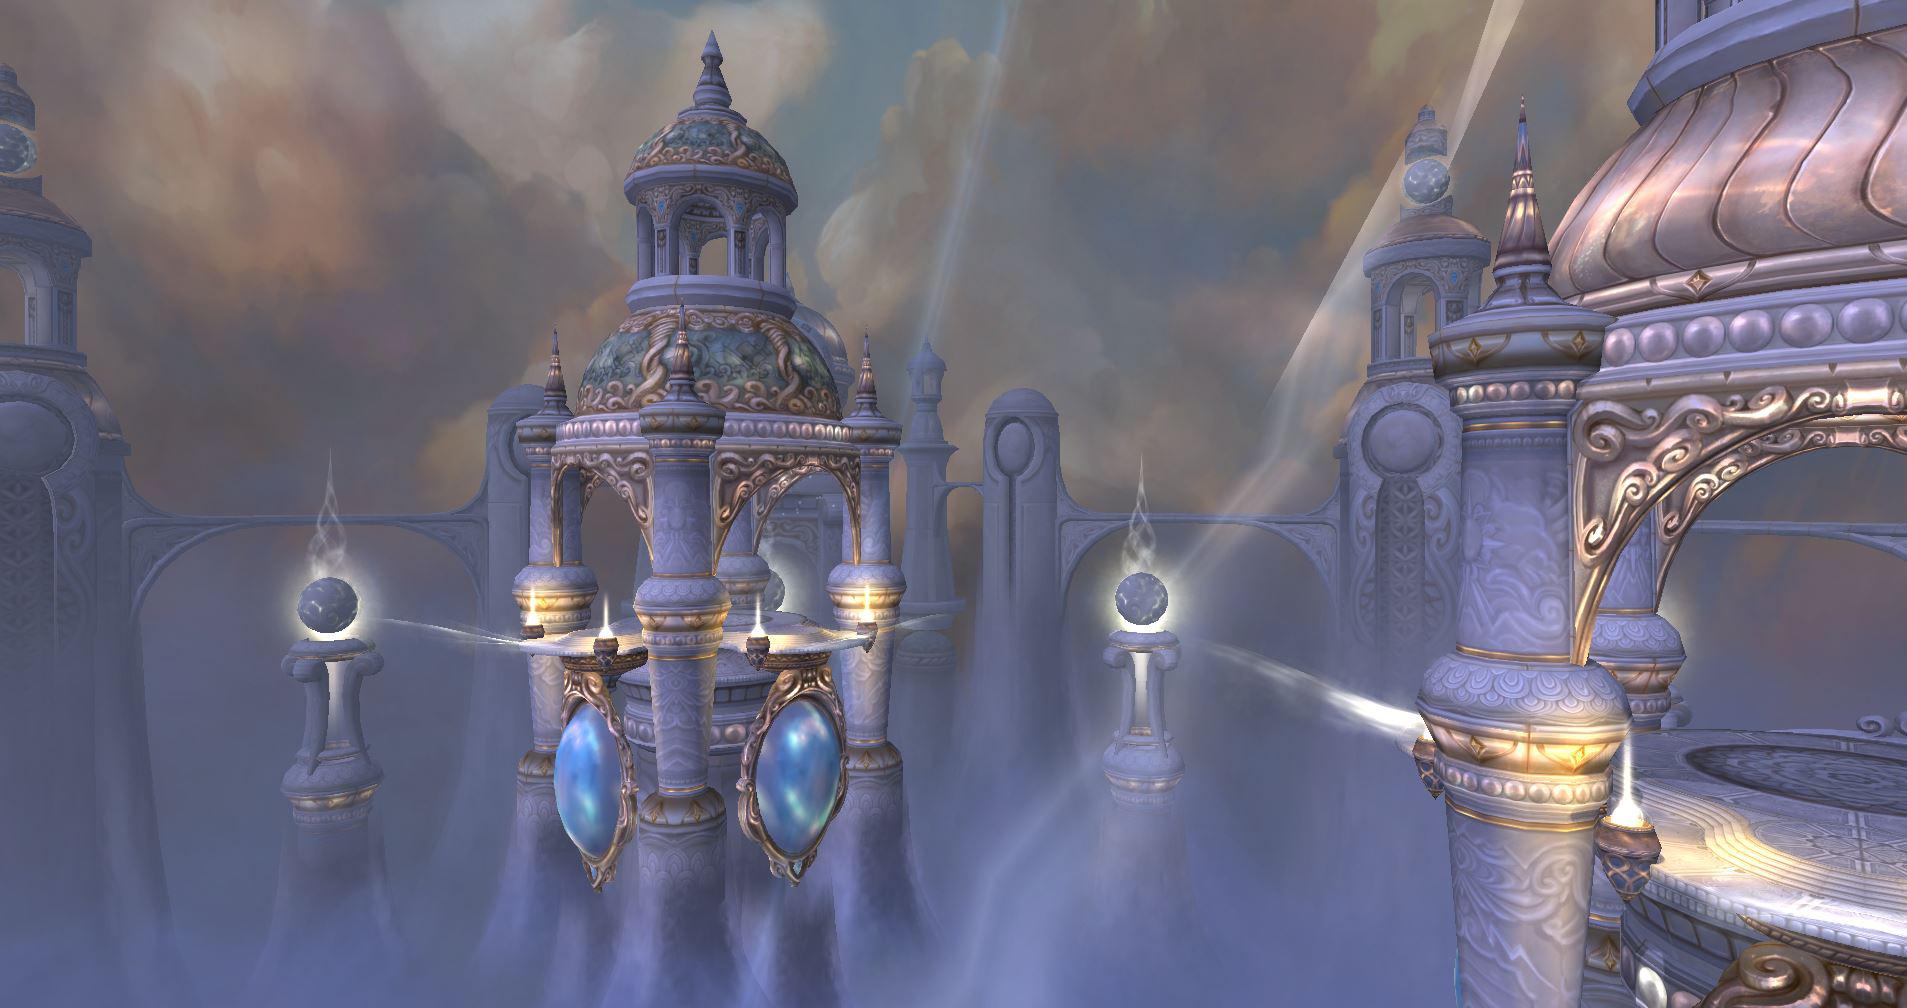  World Of Warcraft Hintergrundbild 1907x1008. All I want is for this aesthetic to come back to the game in the form of a zone. Pretty please, Blizzard